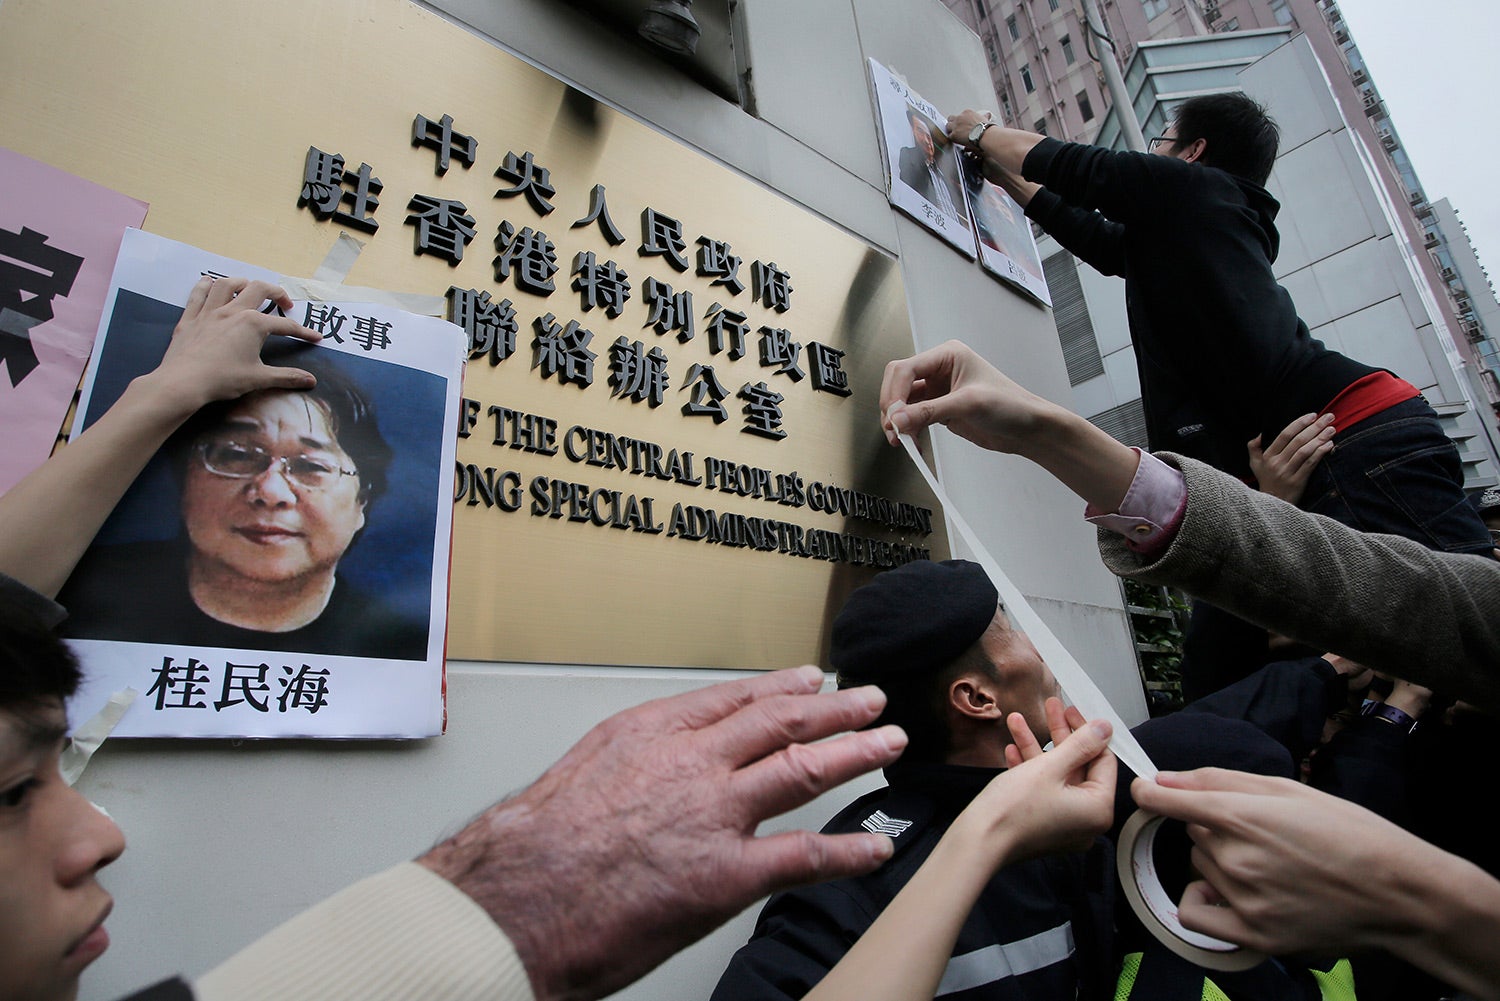 Protesters stick photos of Gui Minhai, left, and other missing booksellers outside the Liaison Office of the Central People's Government in Hong Kong on January 3, 2016.